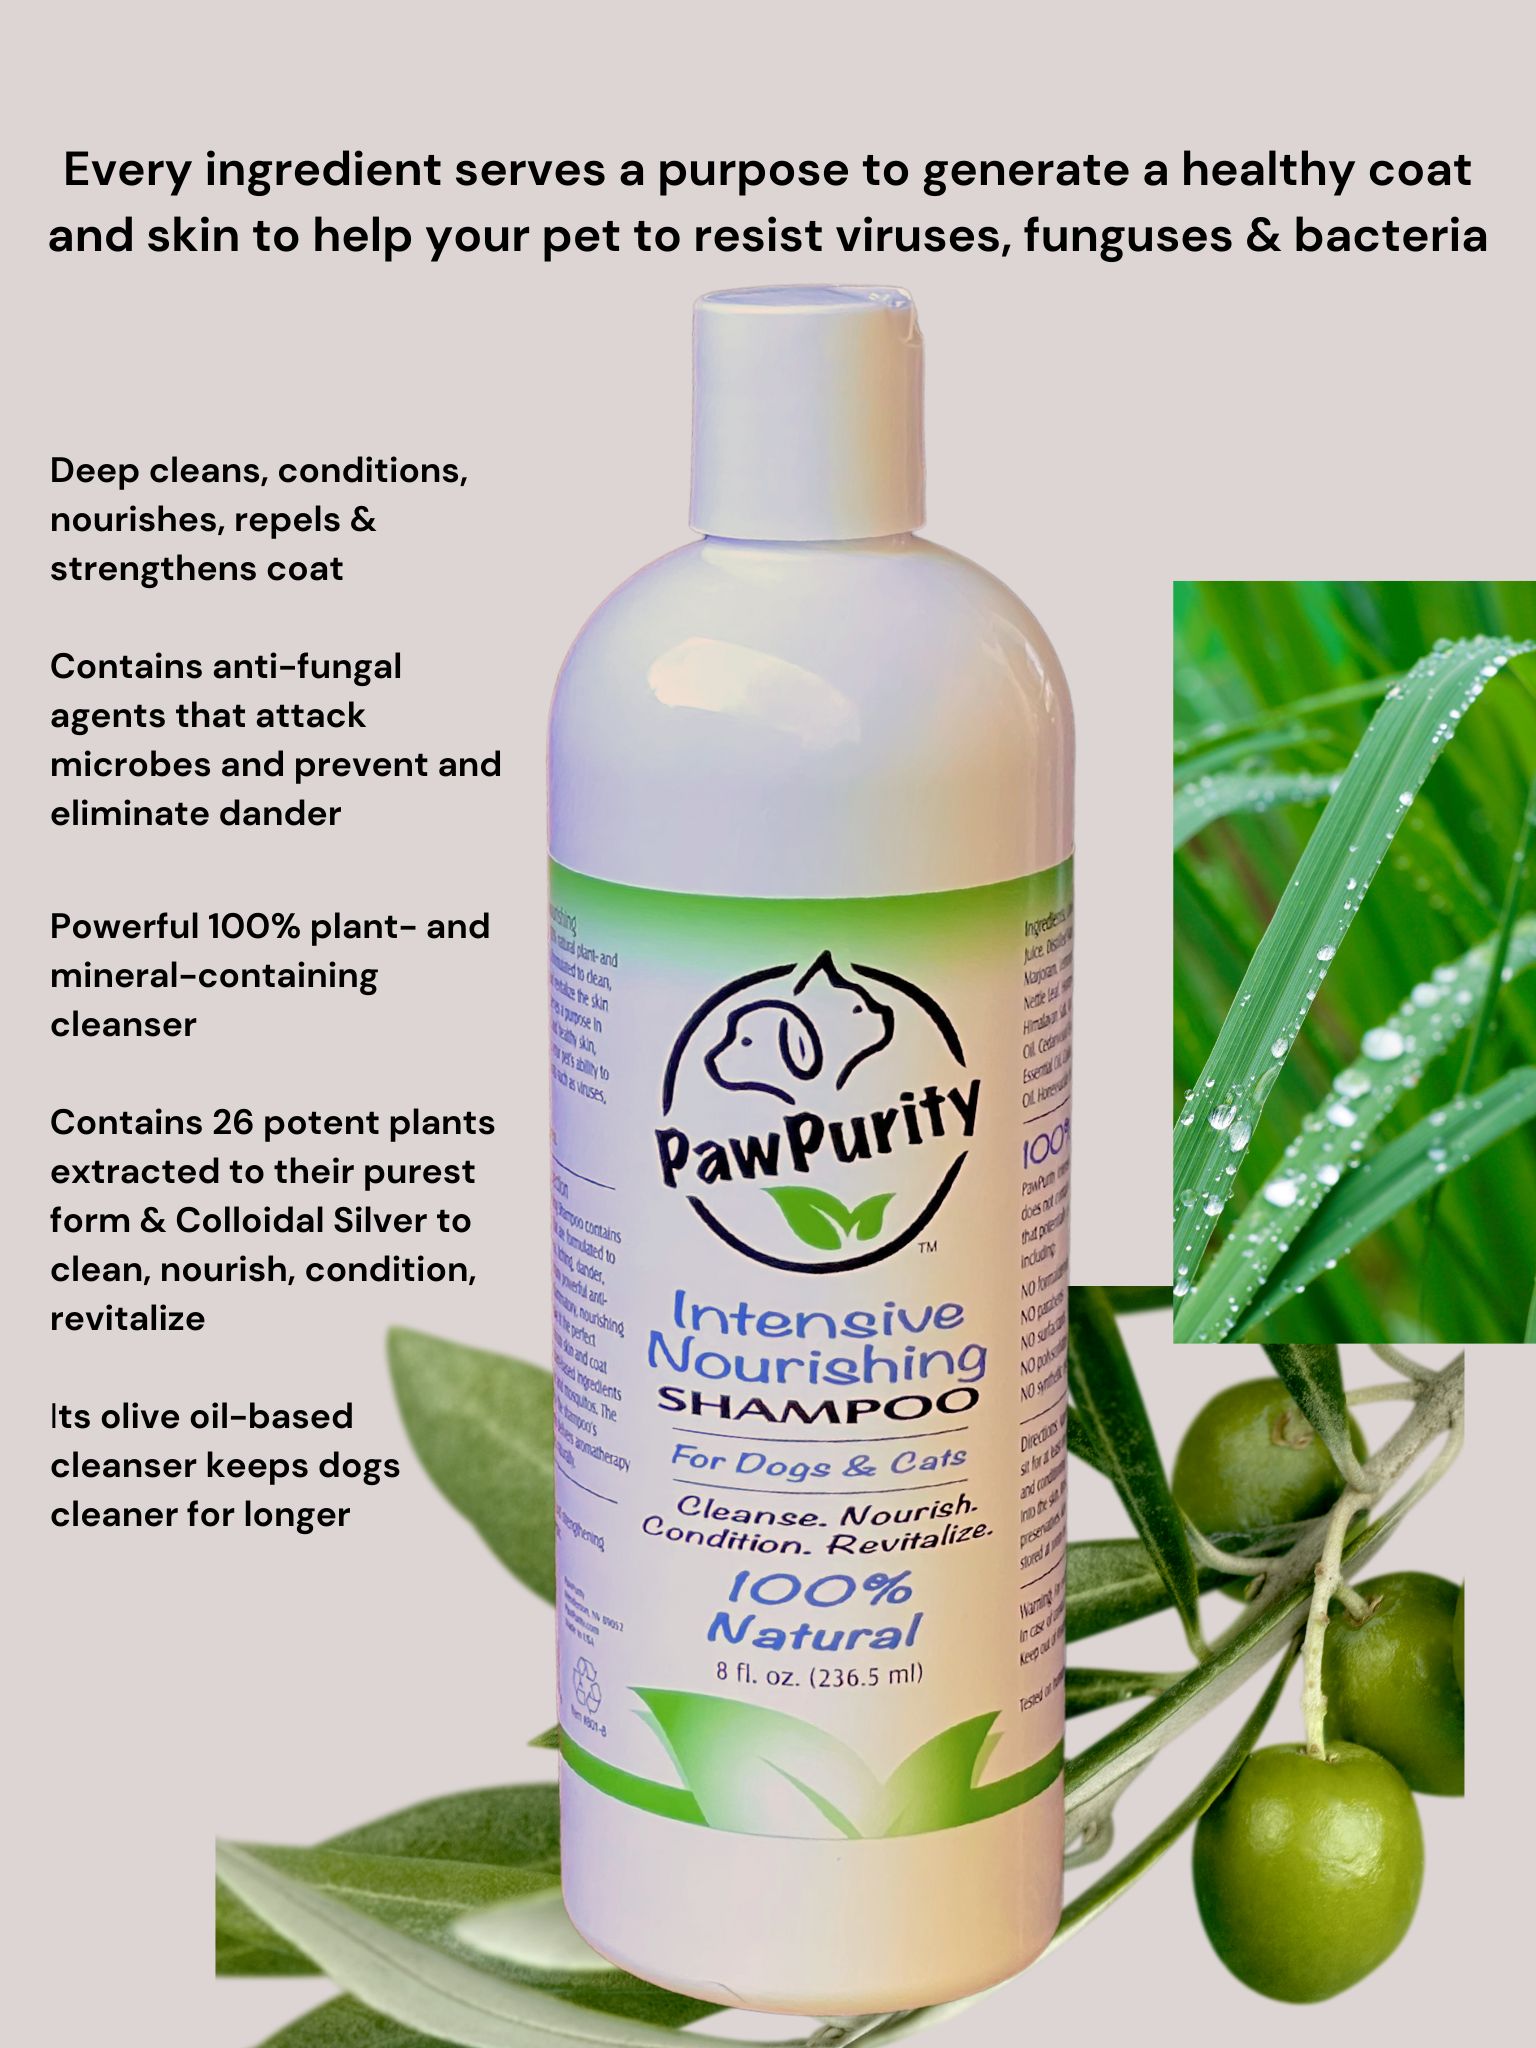 Ingredients and benefits of PawPurity Intensive Nourishing Shampoo for Dogs & Cats with sensitive skin